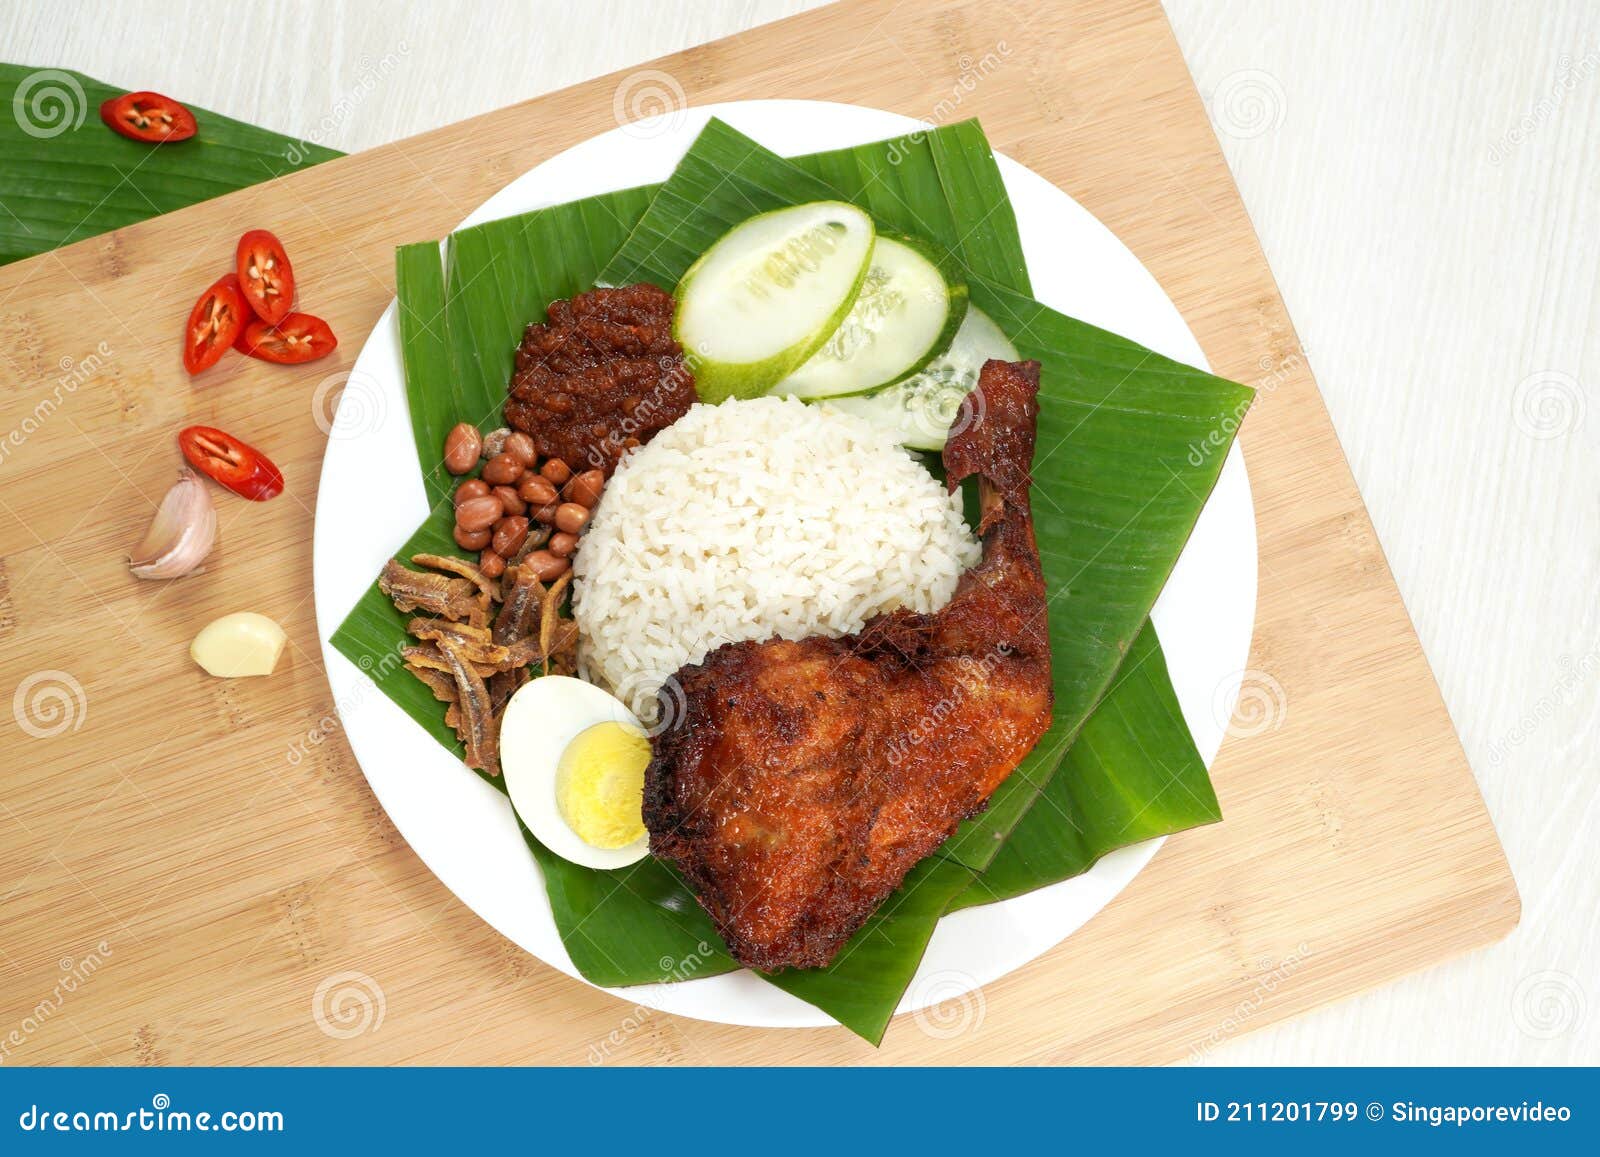 Nasi Lemak Is A Malay Fragrant Rice Dish Cooked In Coconut Milk And